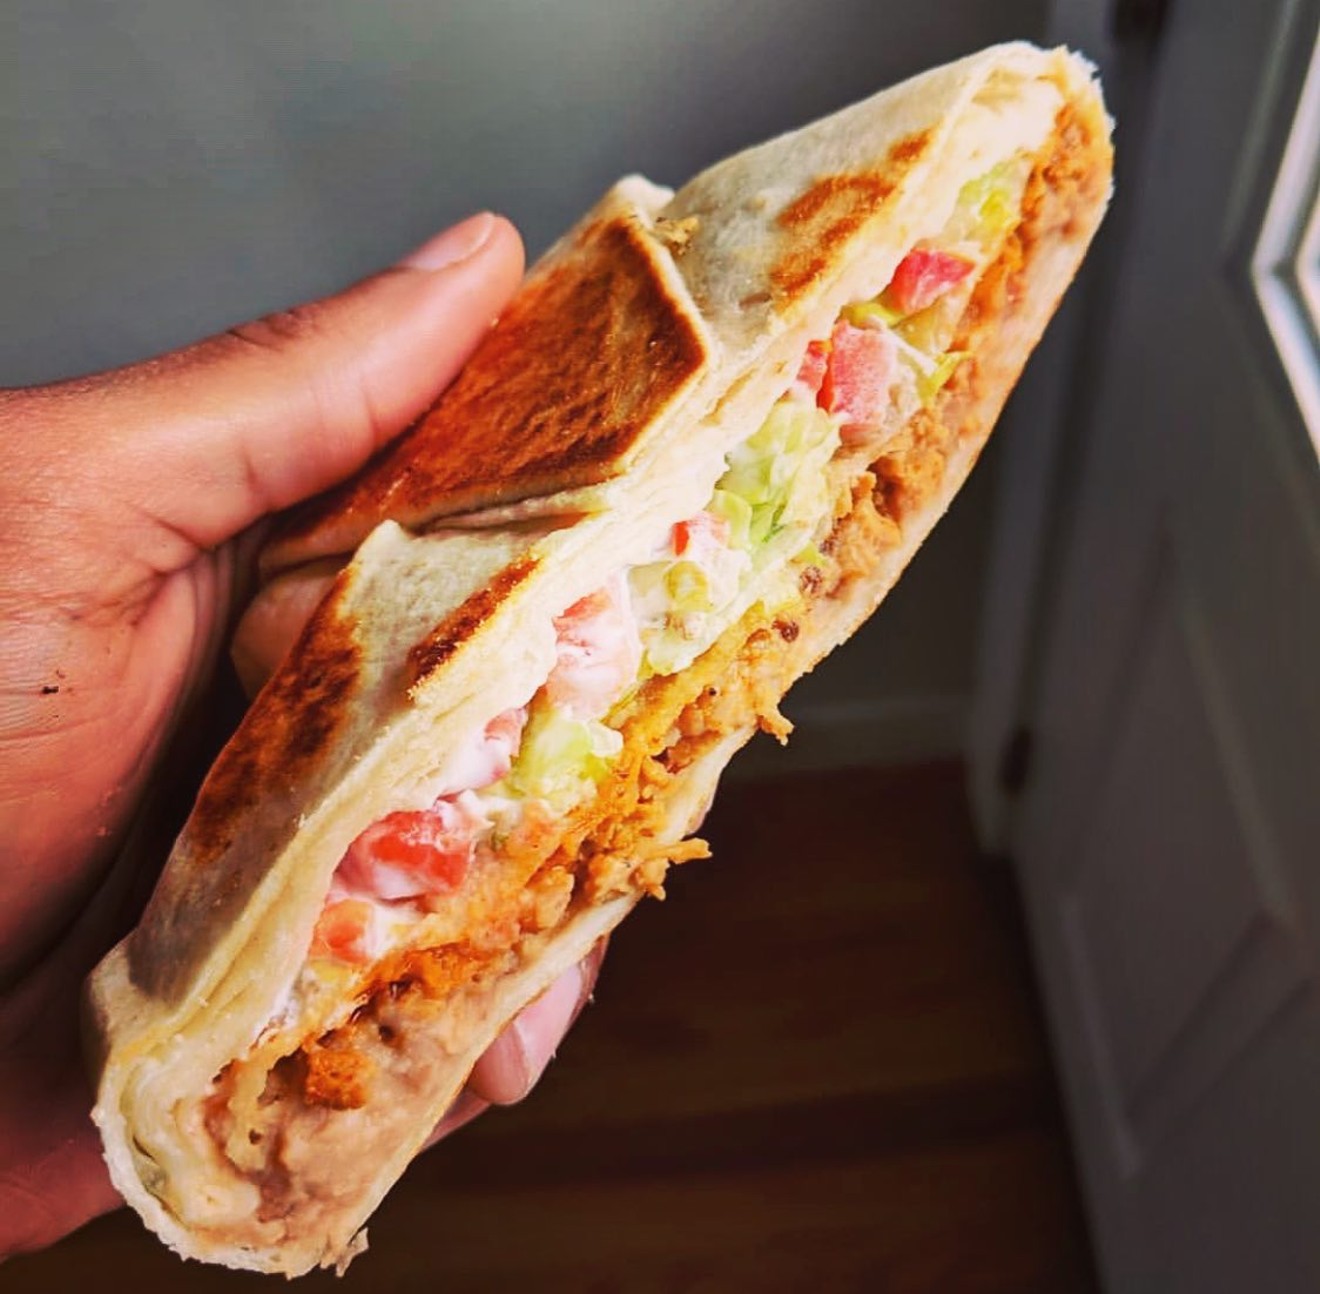 Vegan Van's plant-based take on a Taco Bell classic.